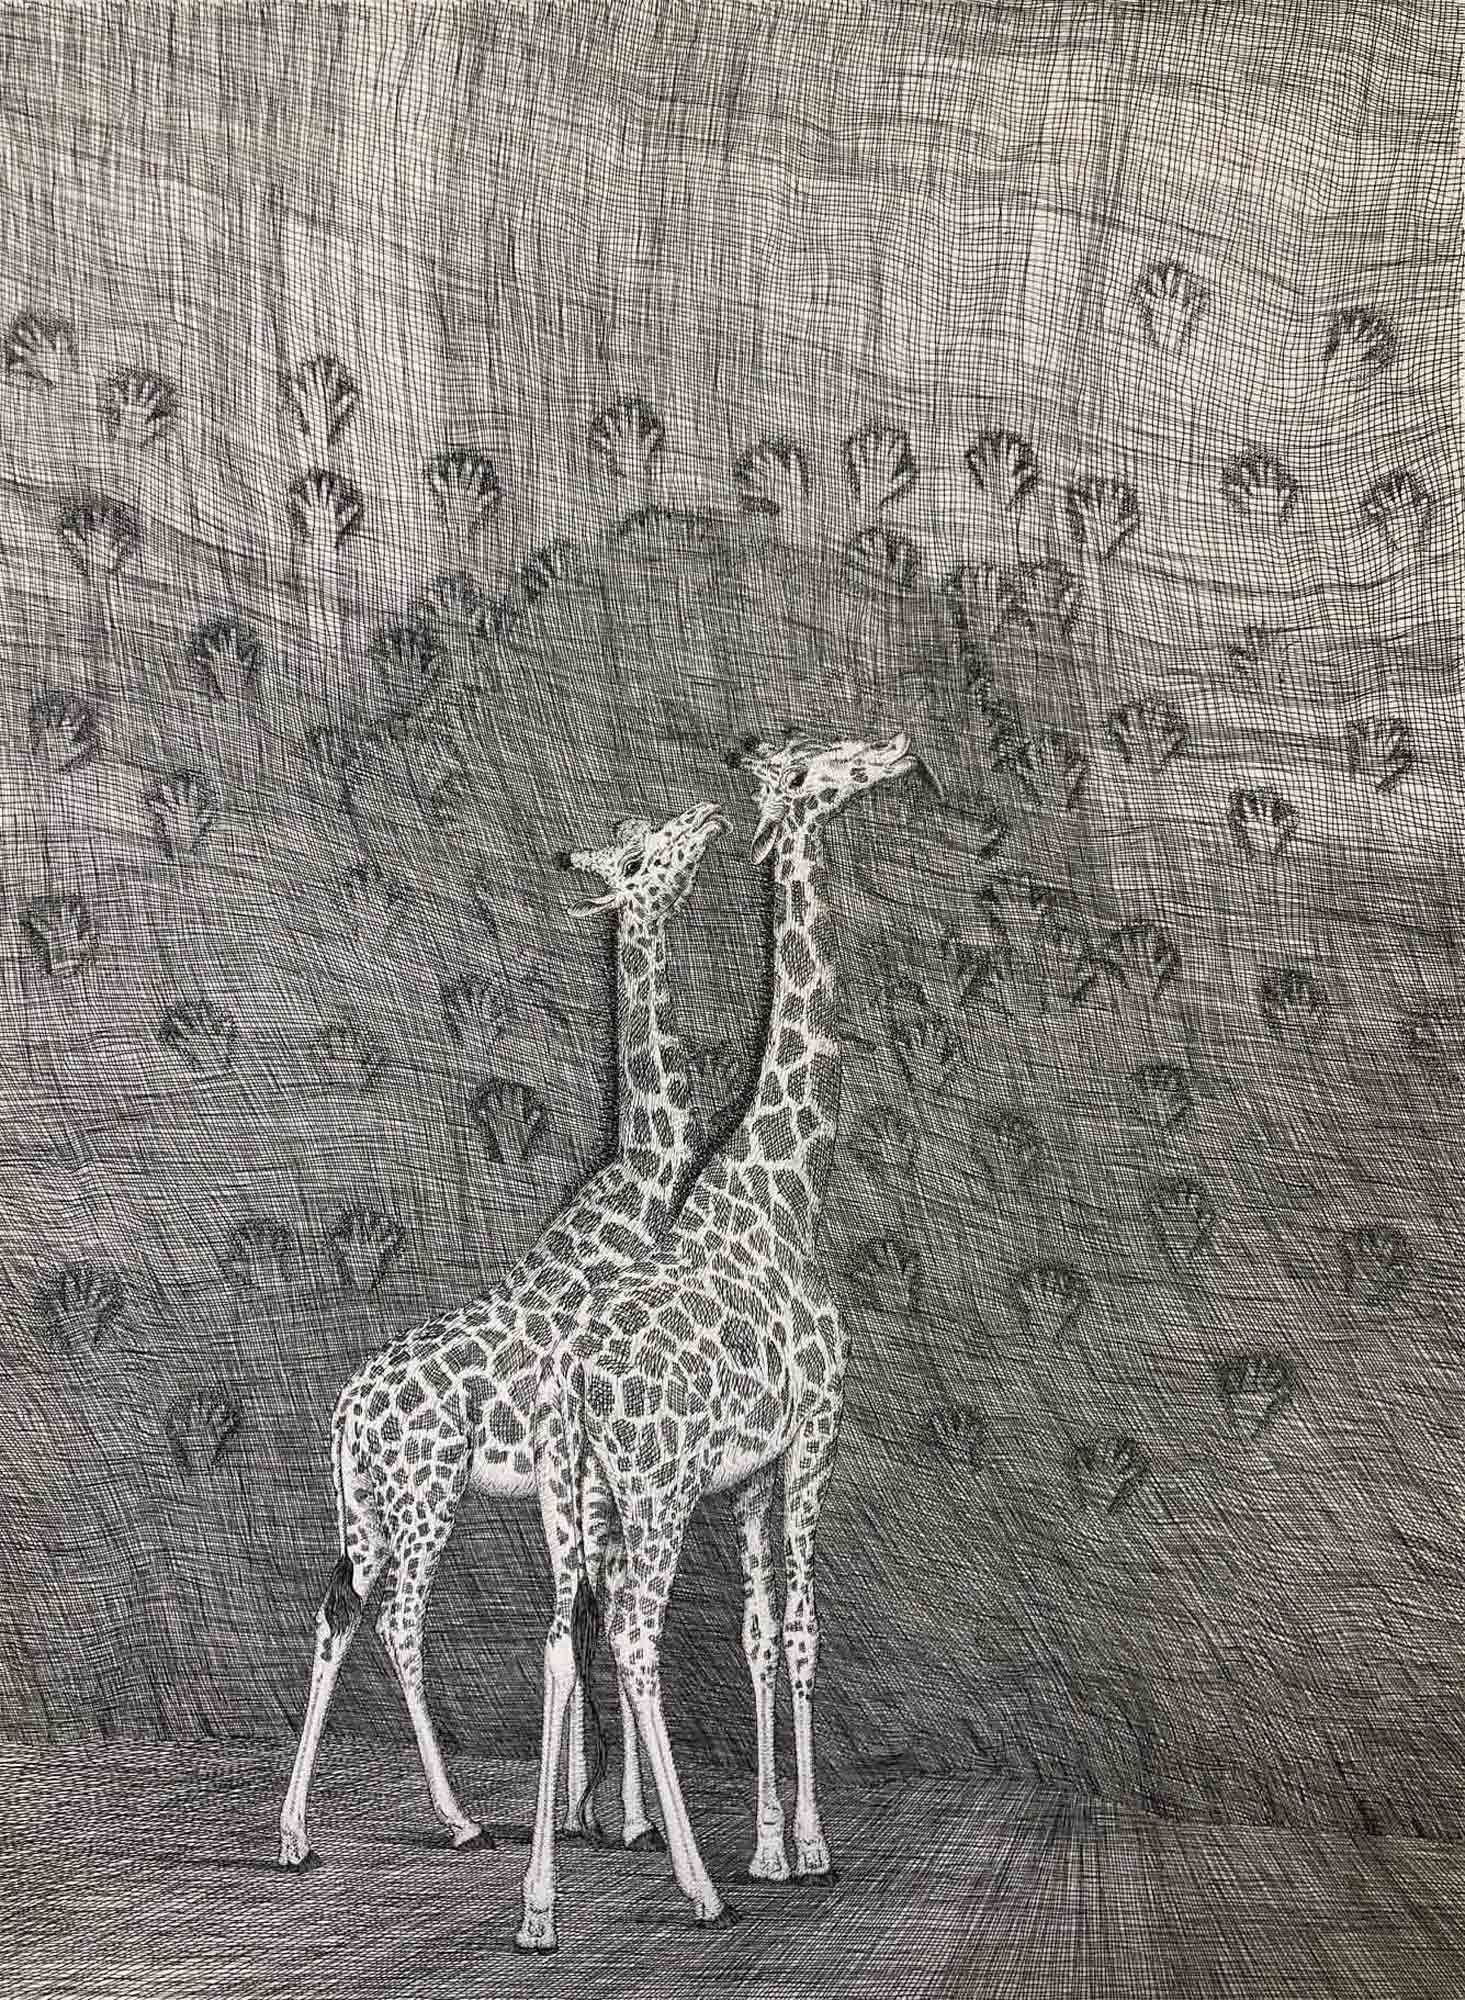 Mark Alexander's ink sketch: Two giraffes amid patterned background with repeating handprints.